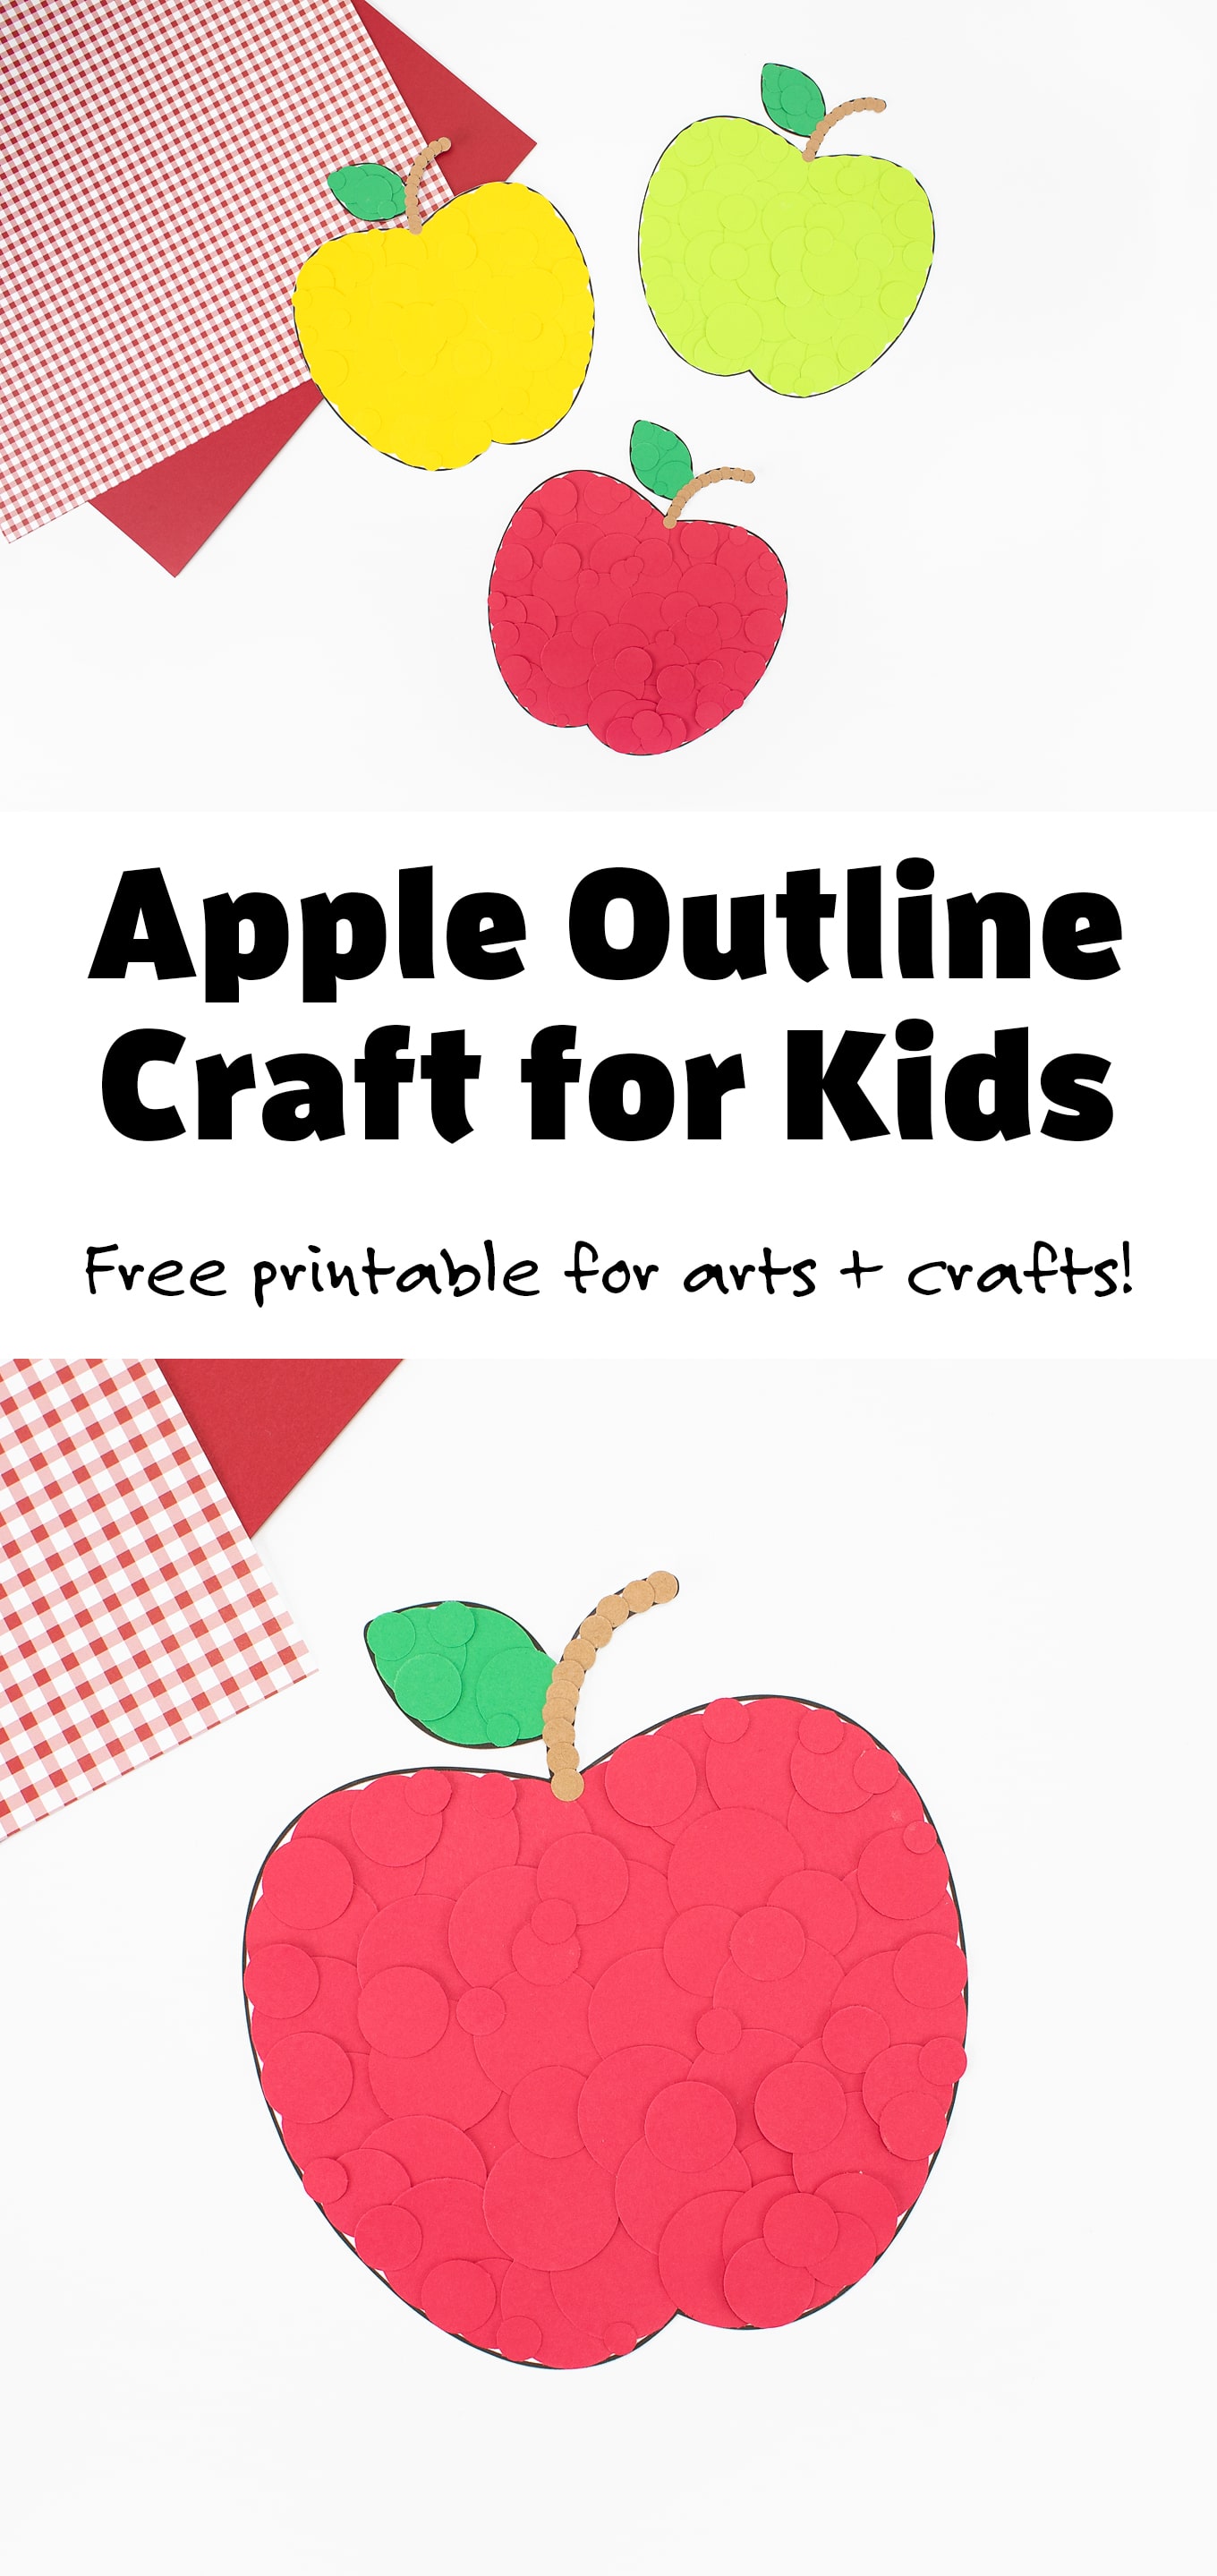 free-printable-apple-outline-for-crafts-fireflies-and-mud-pies